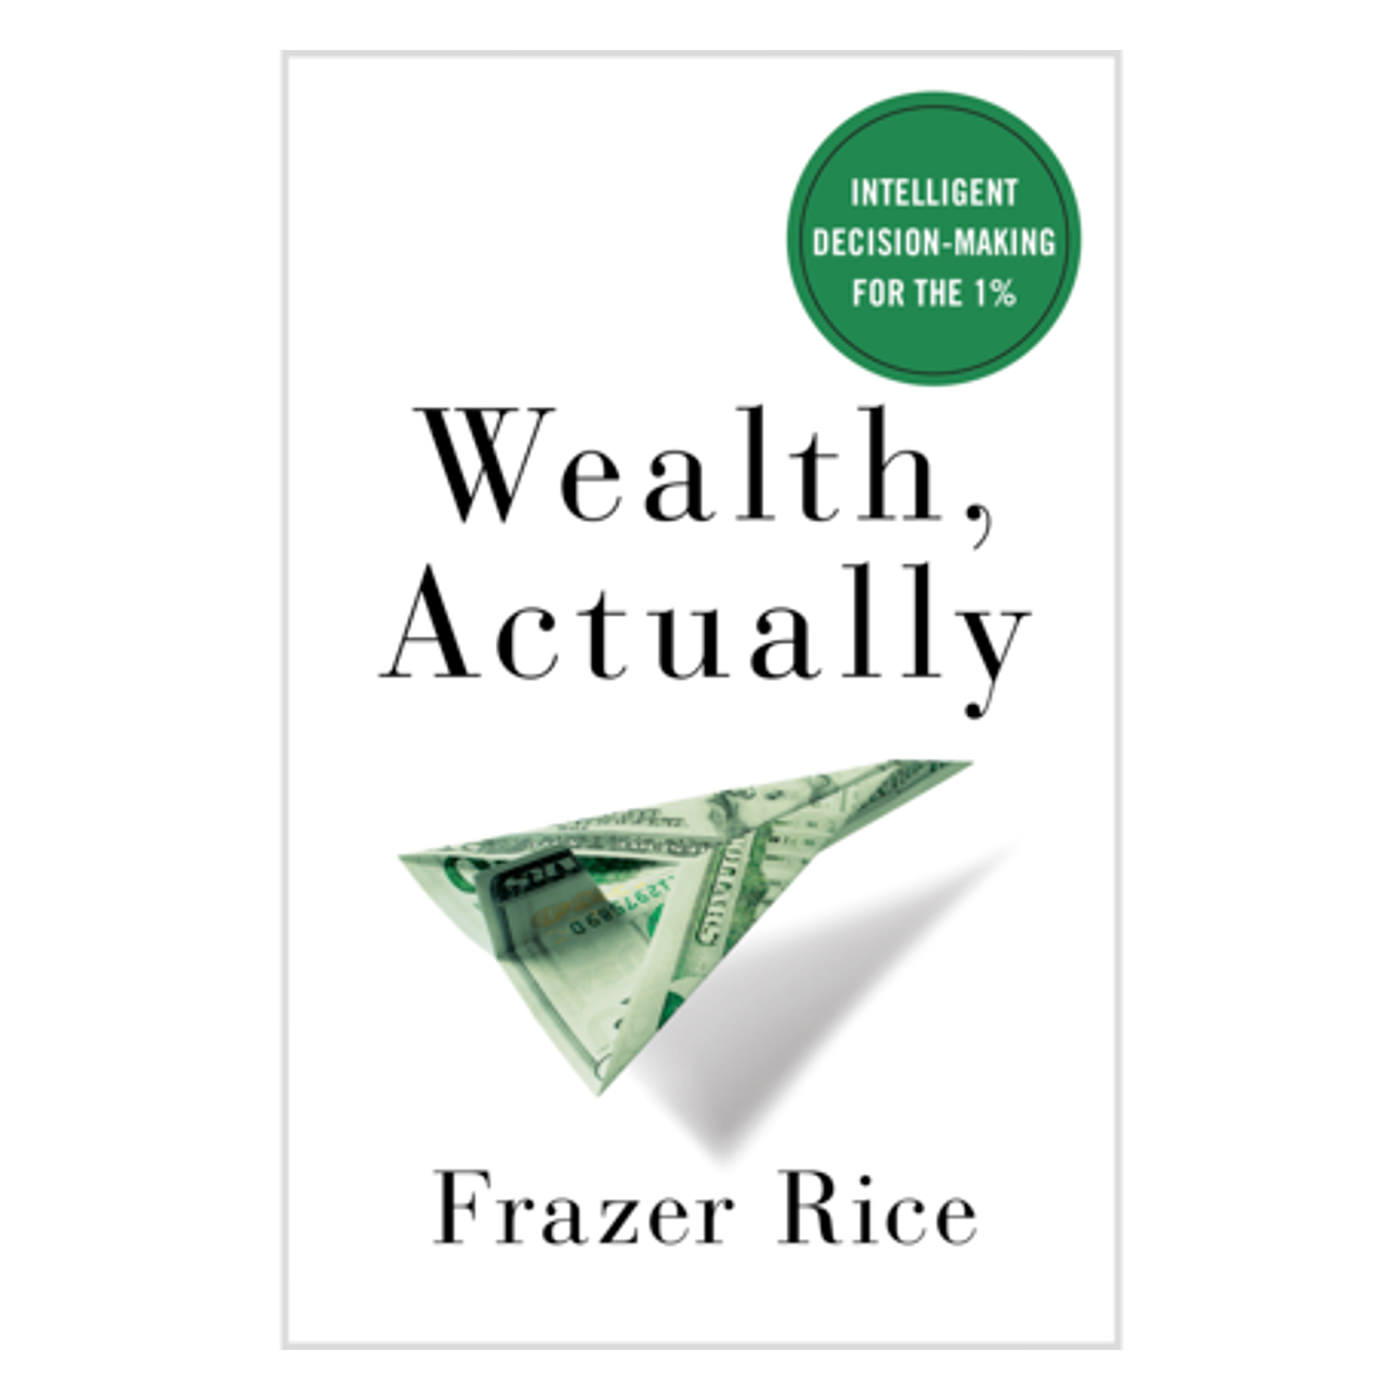 "Wealth Actually" with Frazer Rice